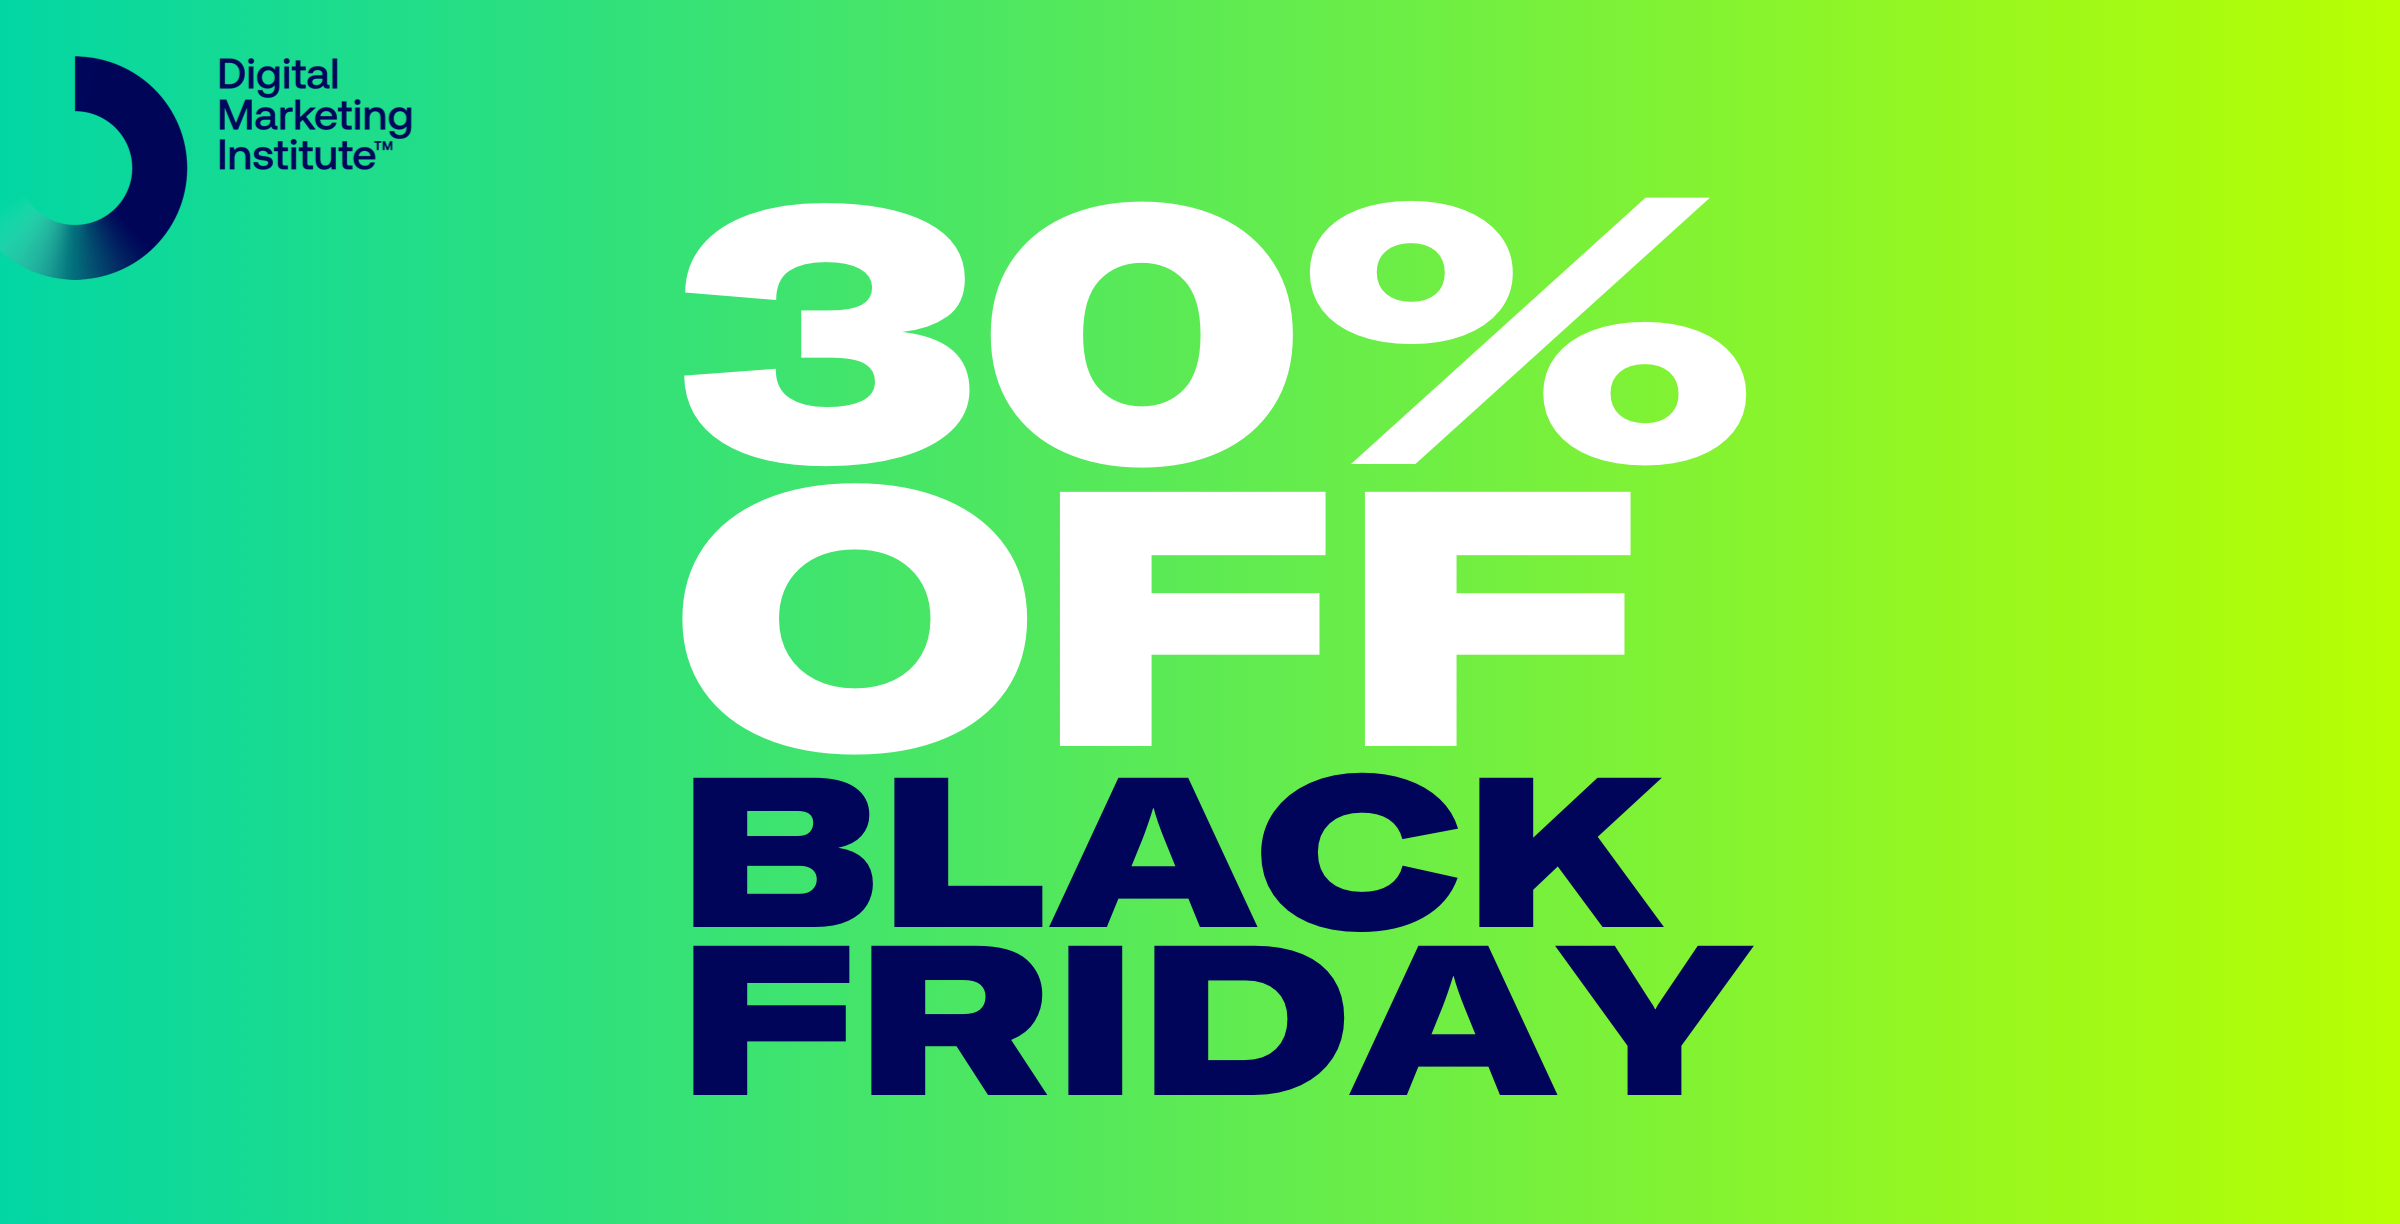 30 pc off Black Friday_Email Header.png